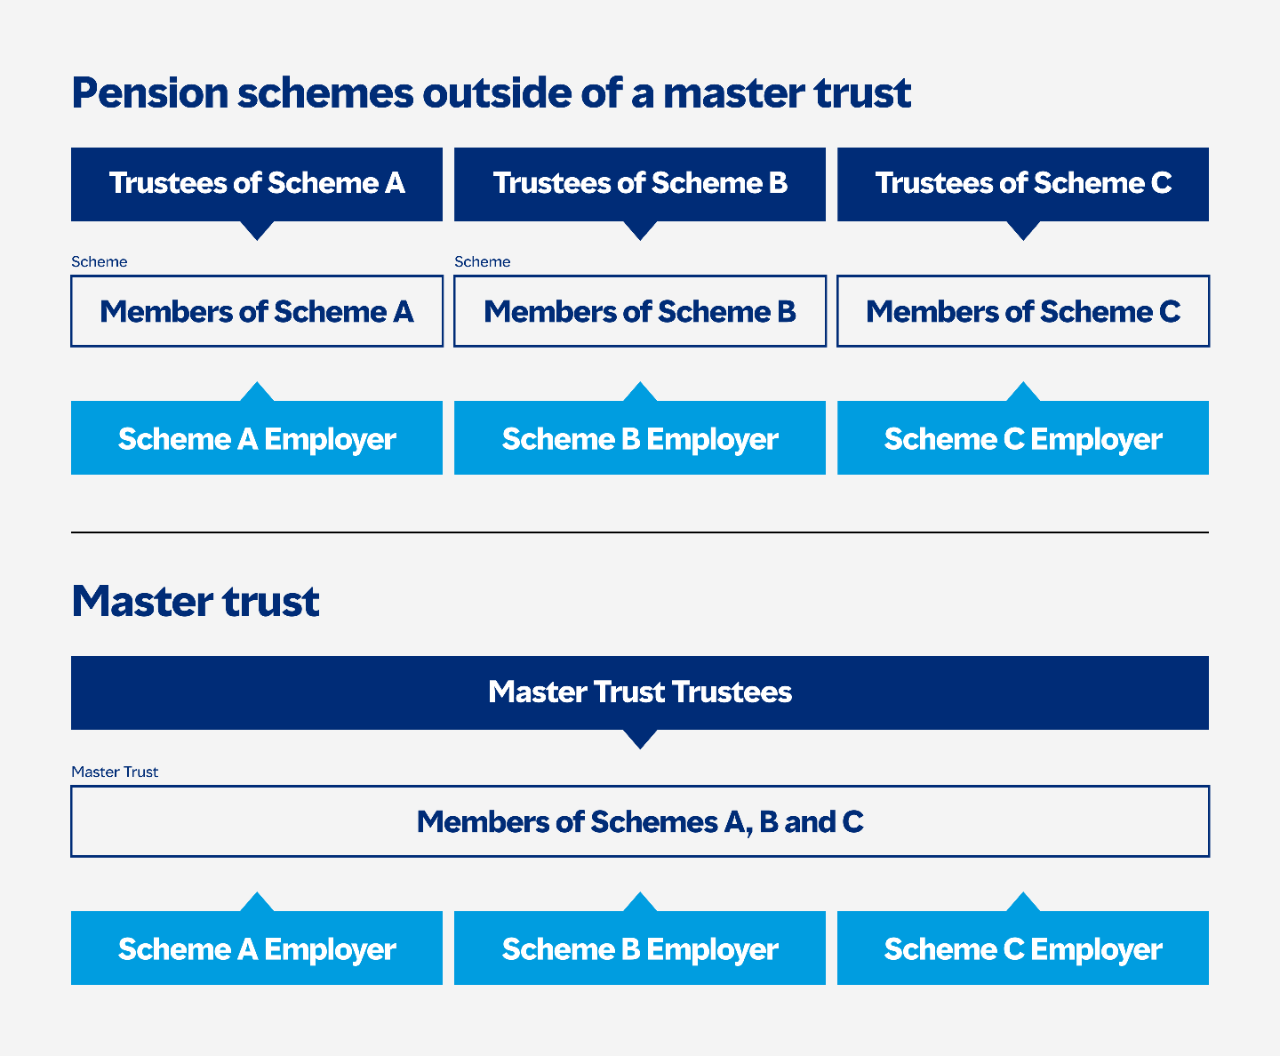 A comparison between pension schemes outside of, and in a master trust. An employer's scheme outside of a master trust has its own trustee board and members. A master trust has multiple employers but collective trustees and members.